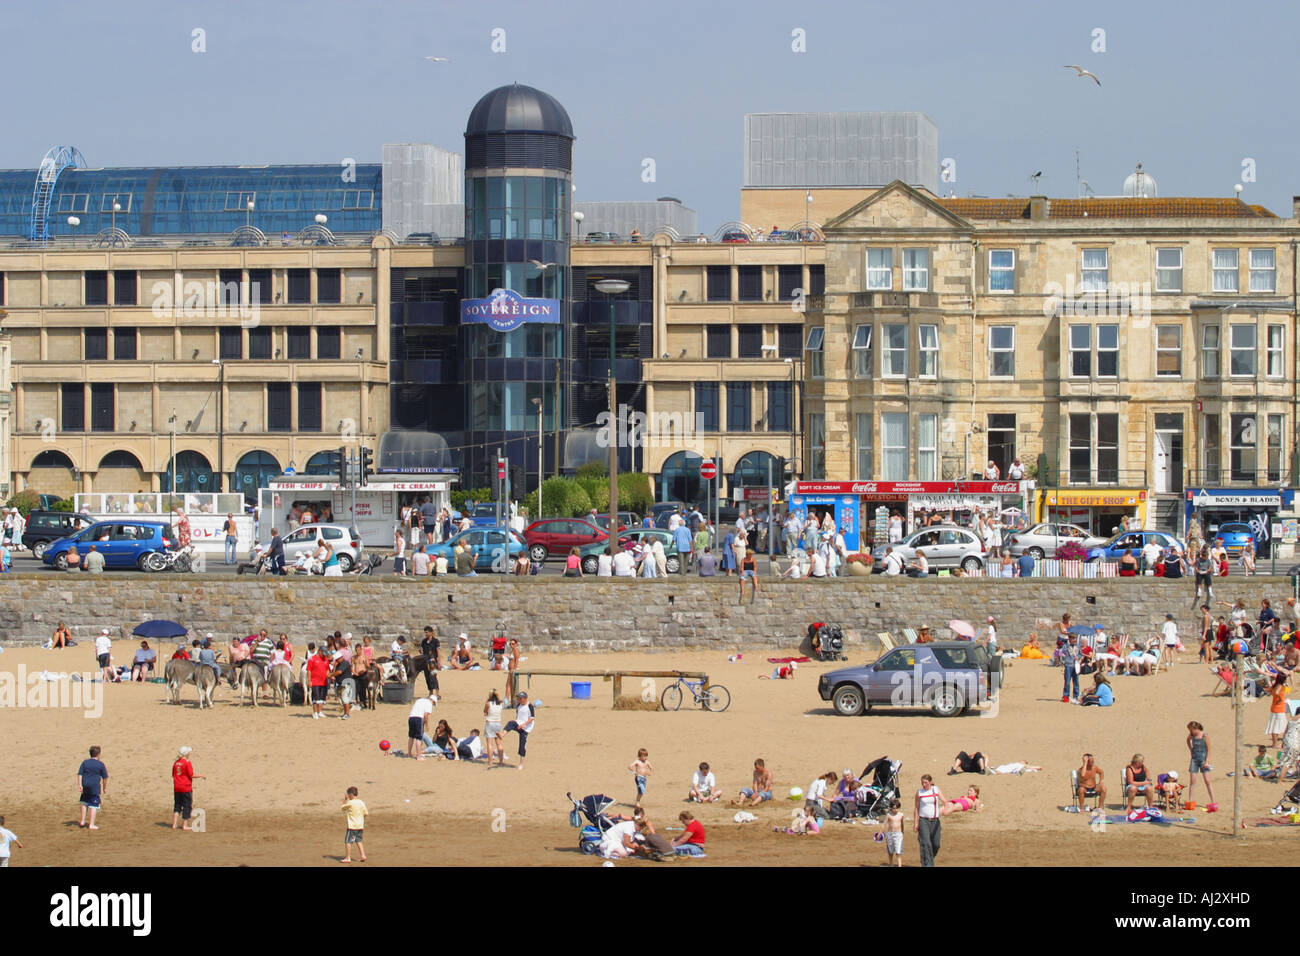 Weston Super Mare crowds of people on beach seafront scene taken summer 2006 Stock Photo